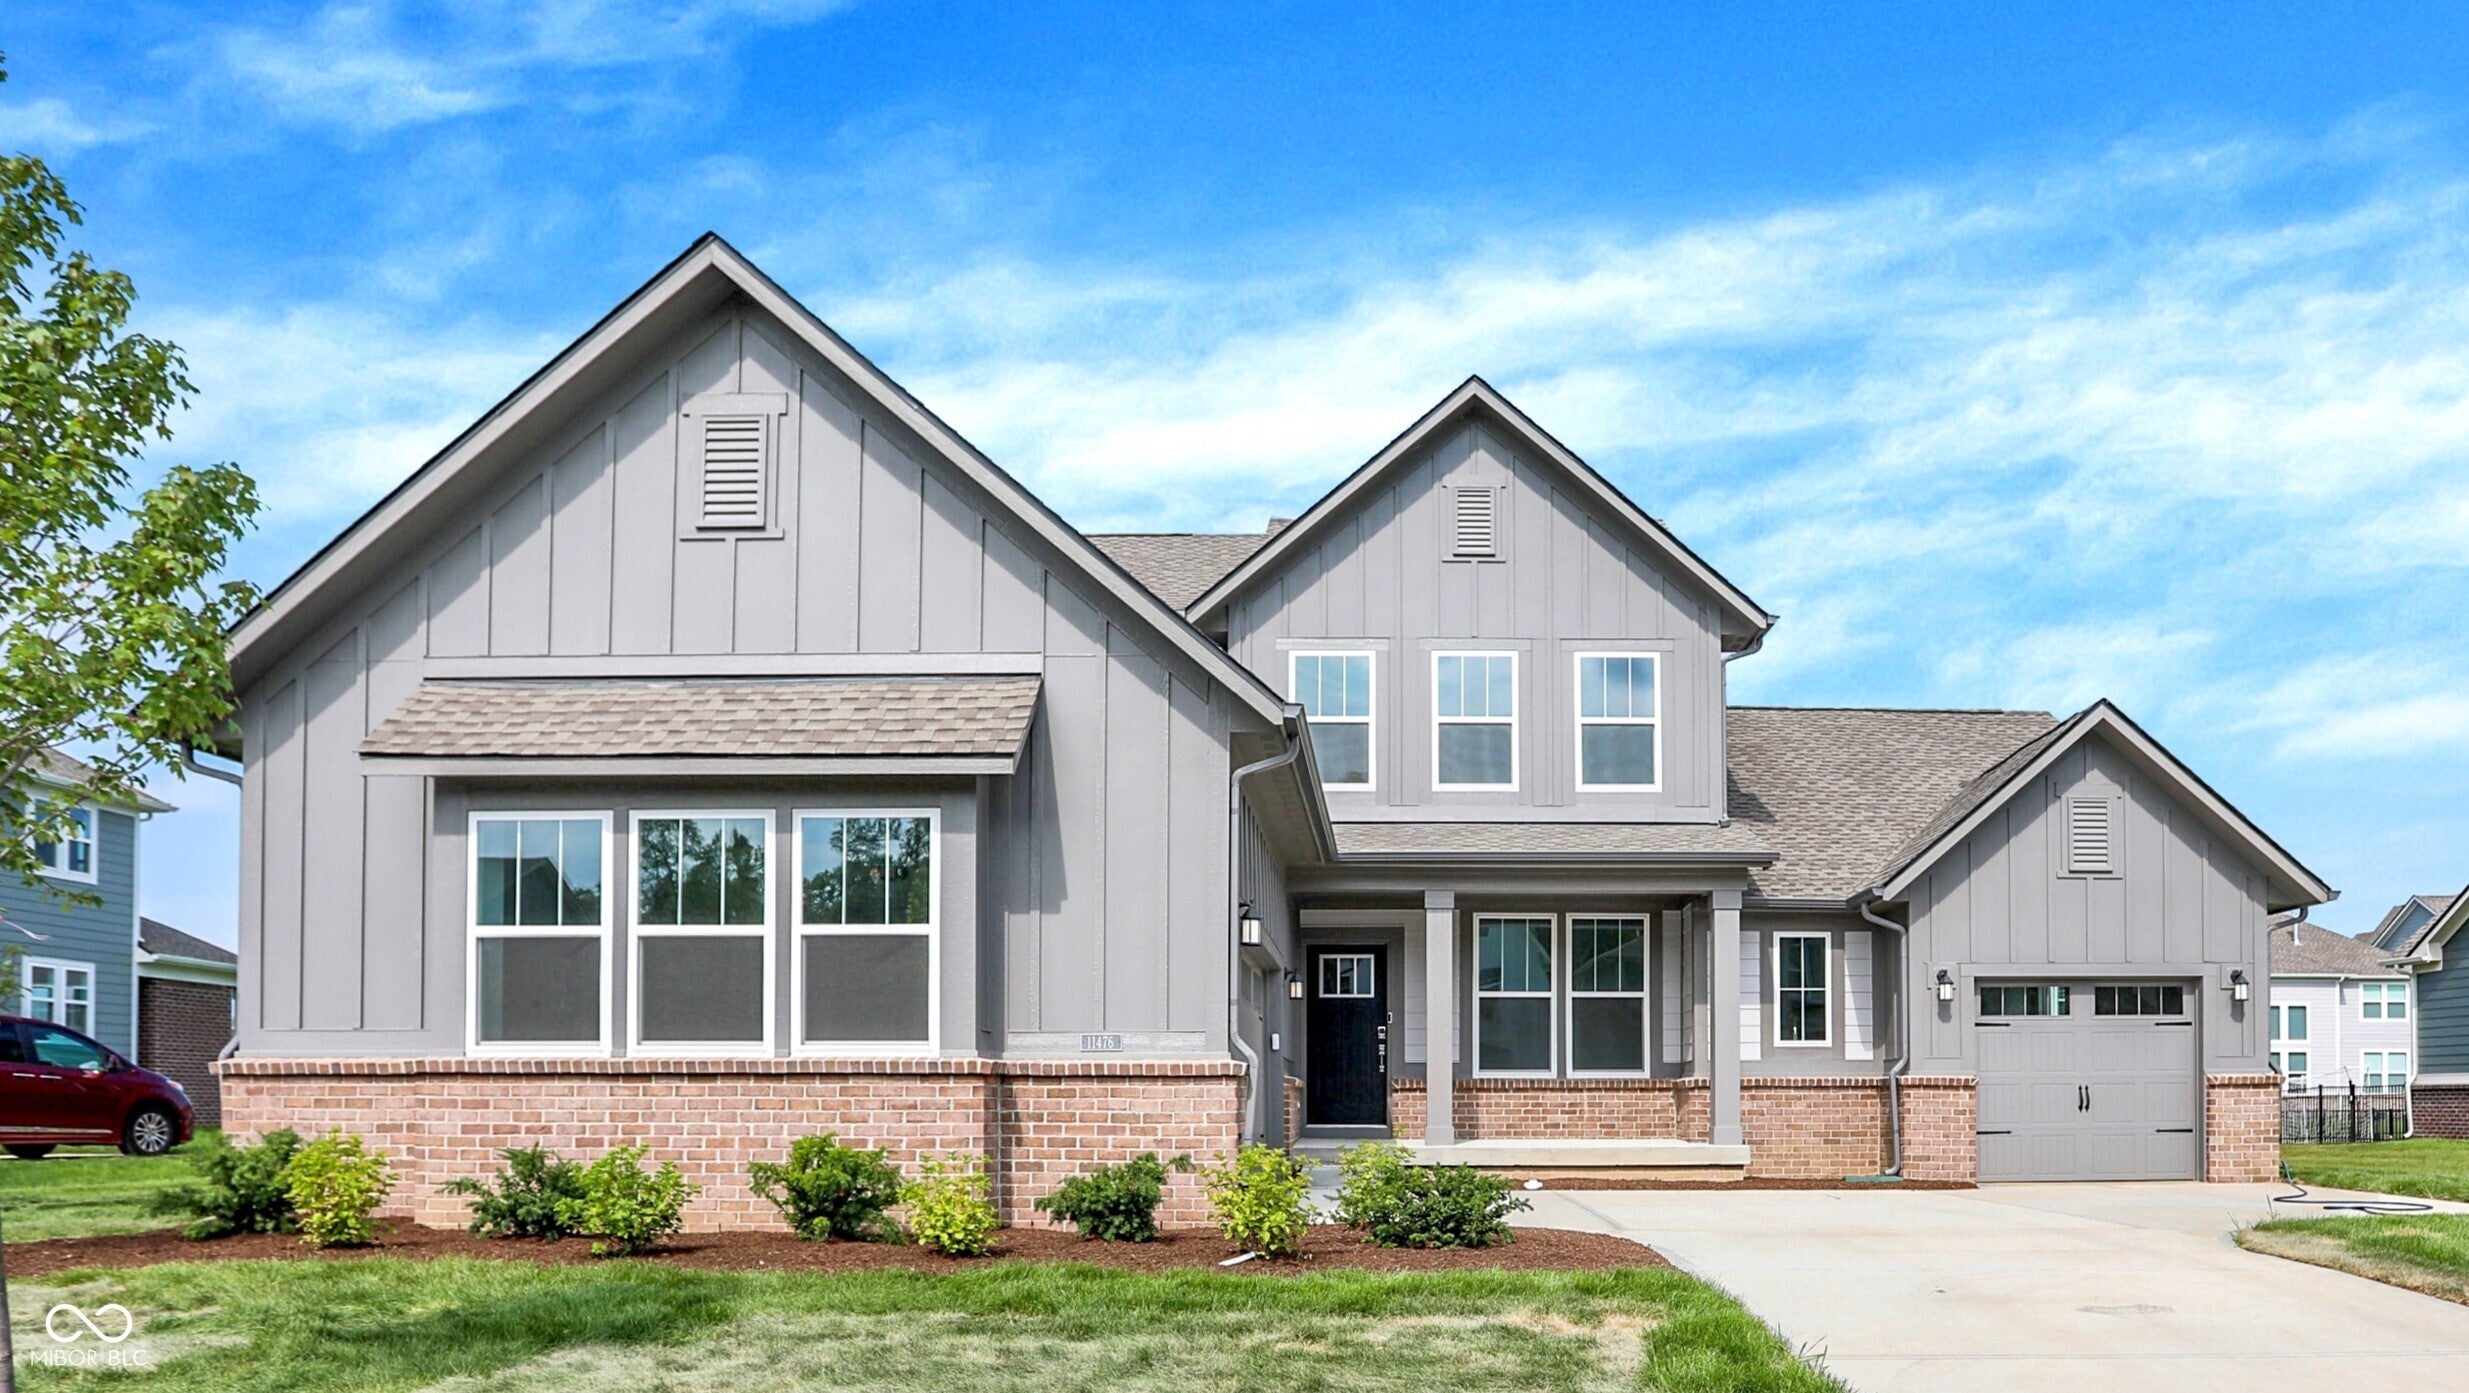 Photo of 11476 Gammel Place Fishers, IN 46040